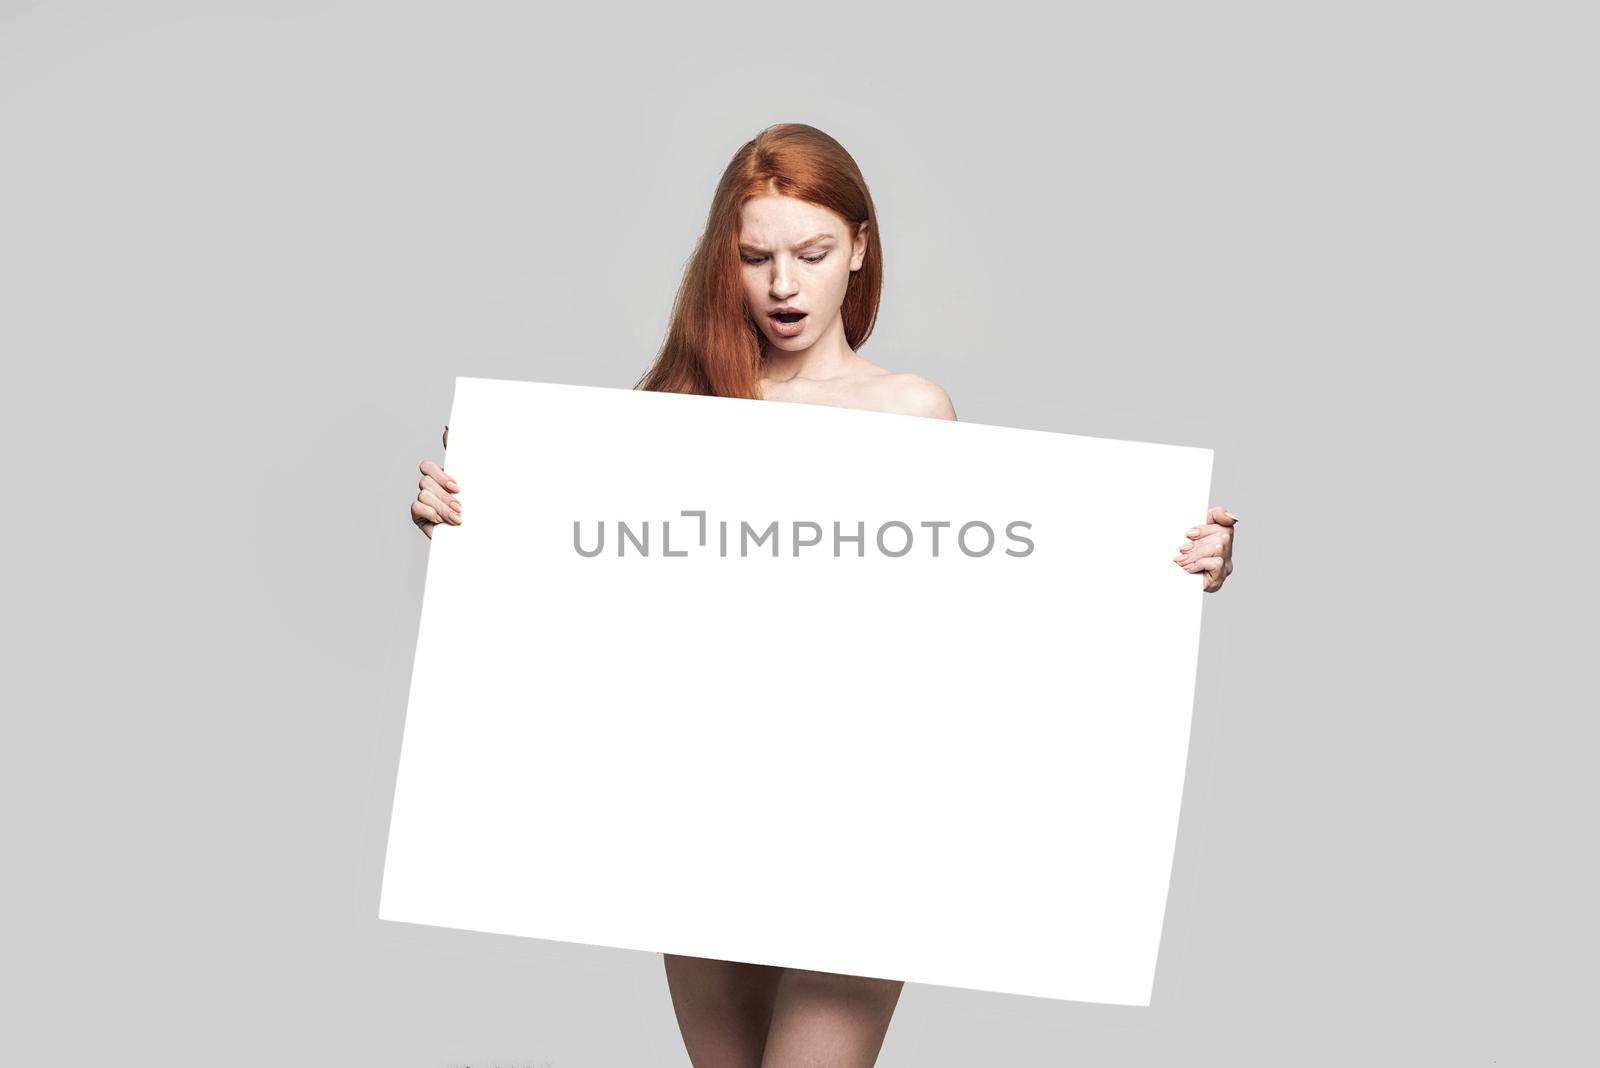 Studio shot of shocked young redhead woman holding empty blank board and looking at it while standing against grey background. Advertising